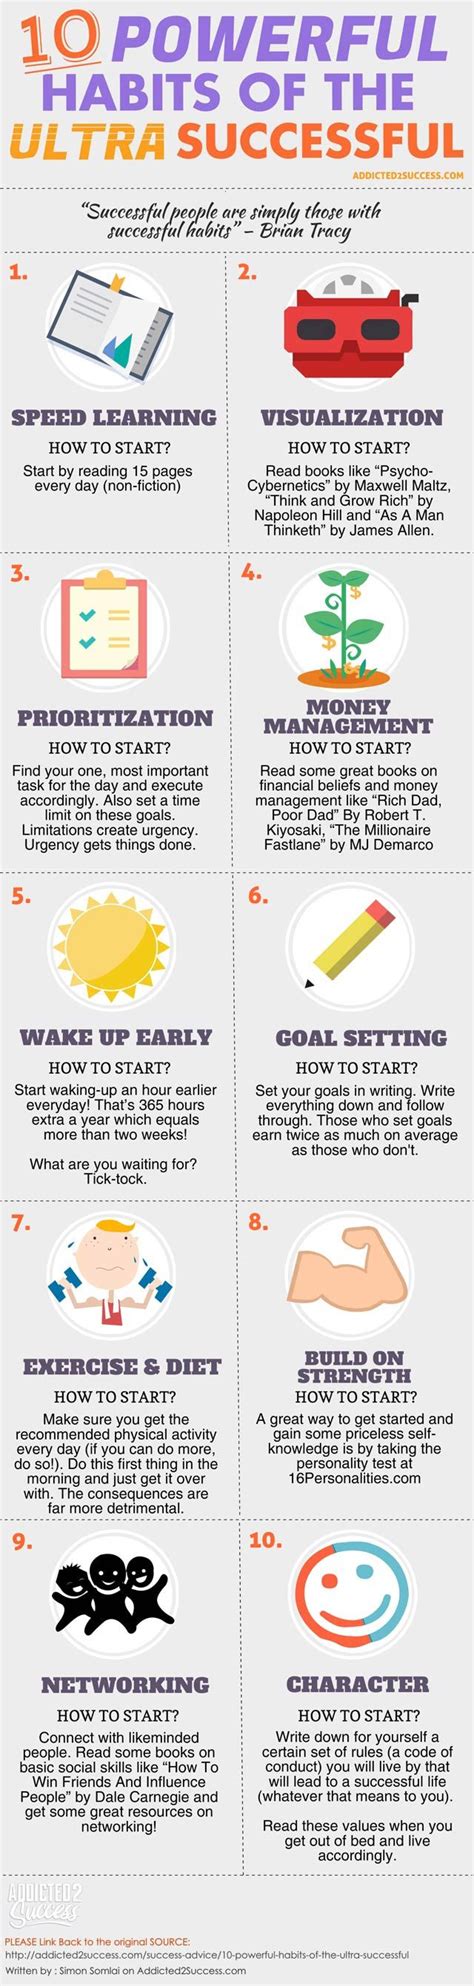 10 Powerful Habits Of The Ultra Successful [Infographic] | Bit Rebels